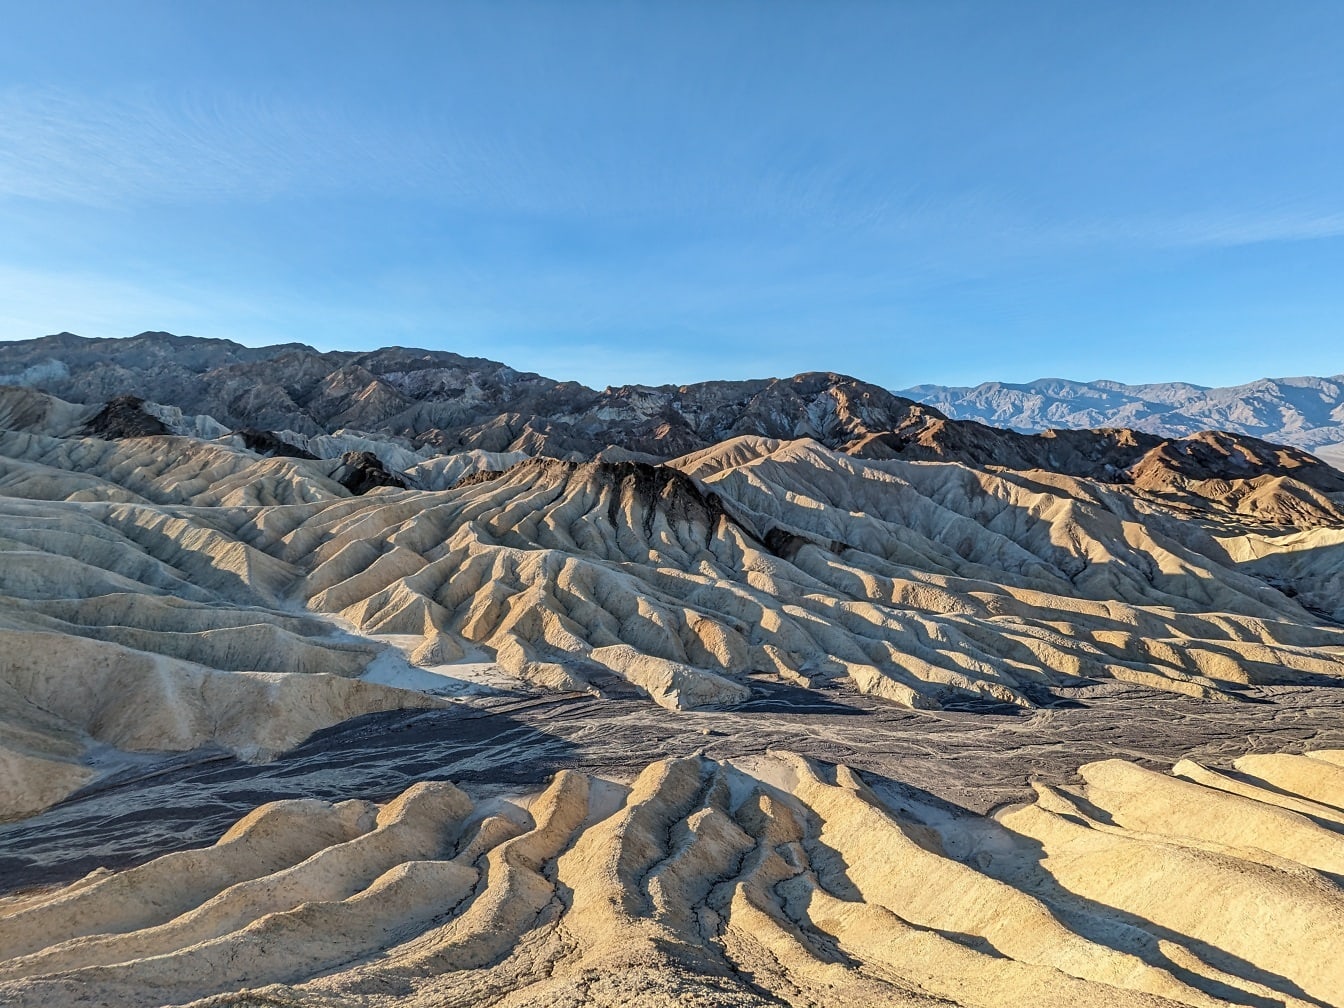 Panorama of Death valley national park with sandstone dunes and blue sky